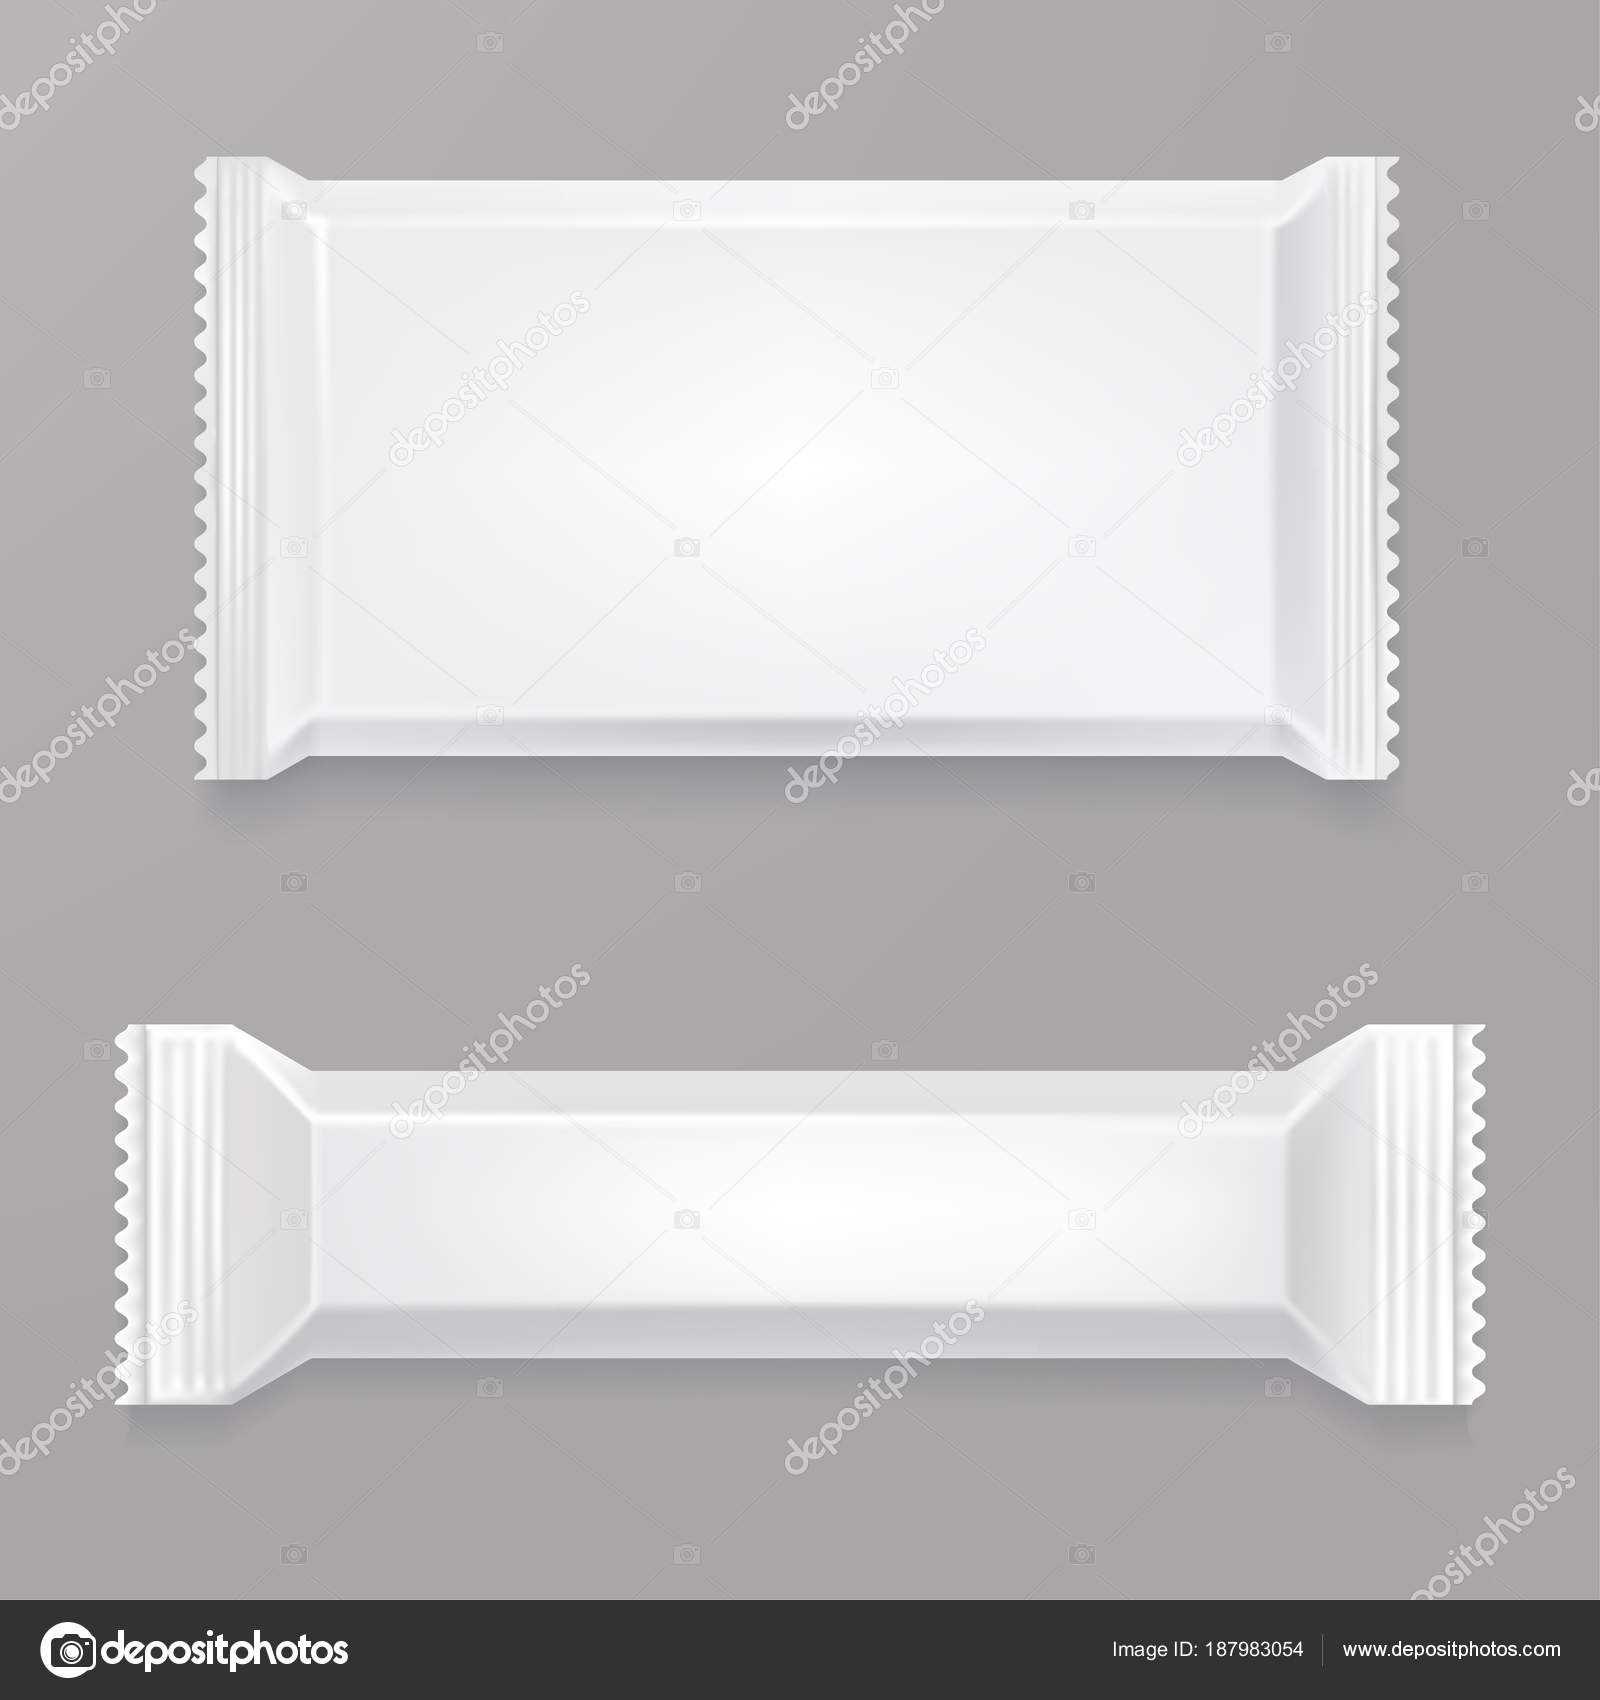 White Blank Chocolate Bar Mockup. White Polyethylene Package With Blank Candy Bar Wrapper Template